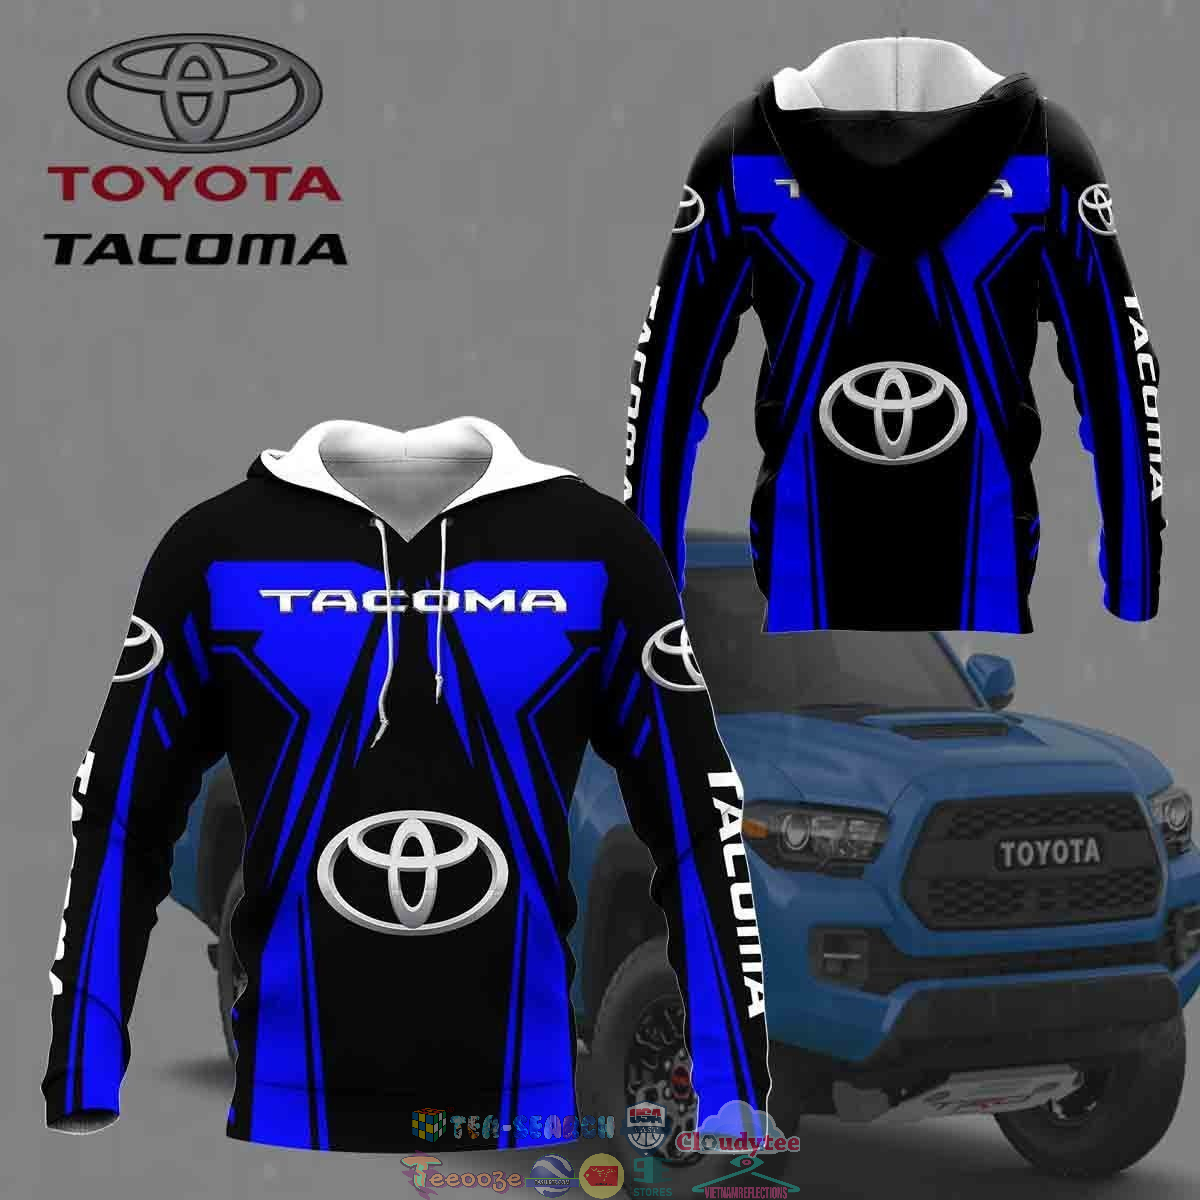 Toyota Tacoma ver 20 3D hoodie and t-shirt – Saleoff